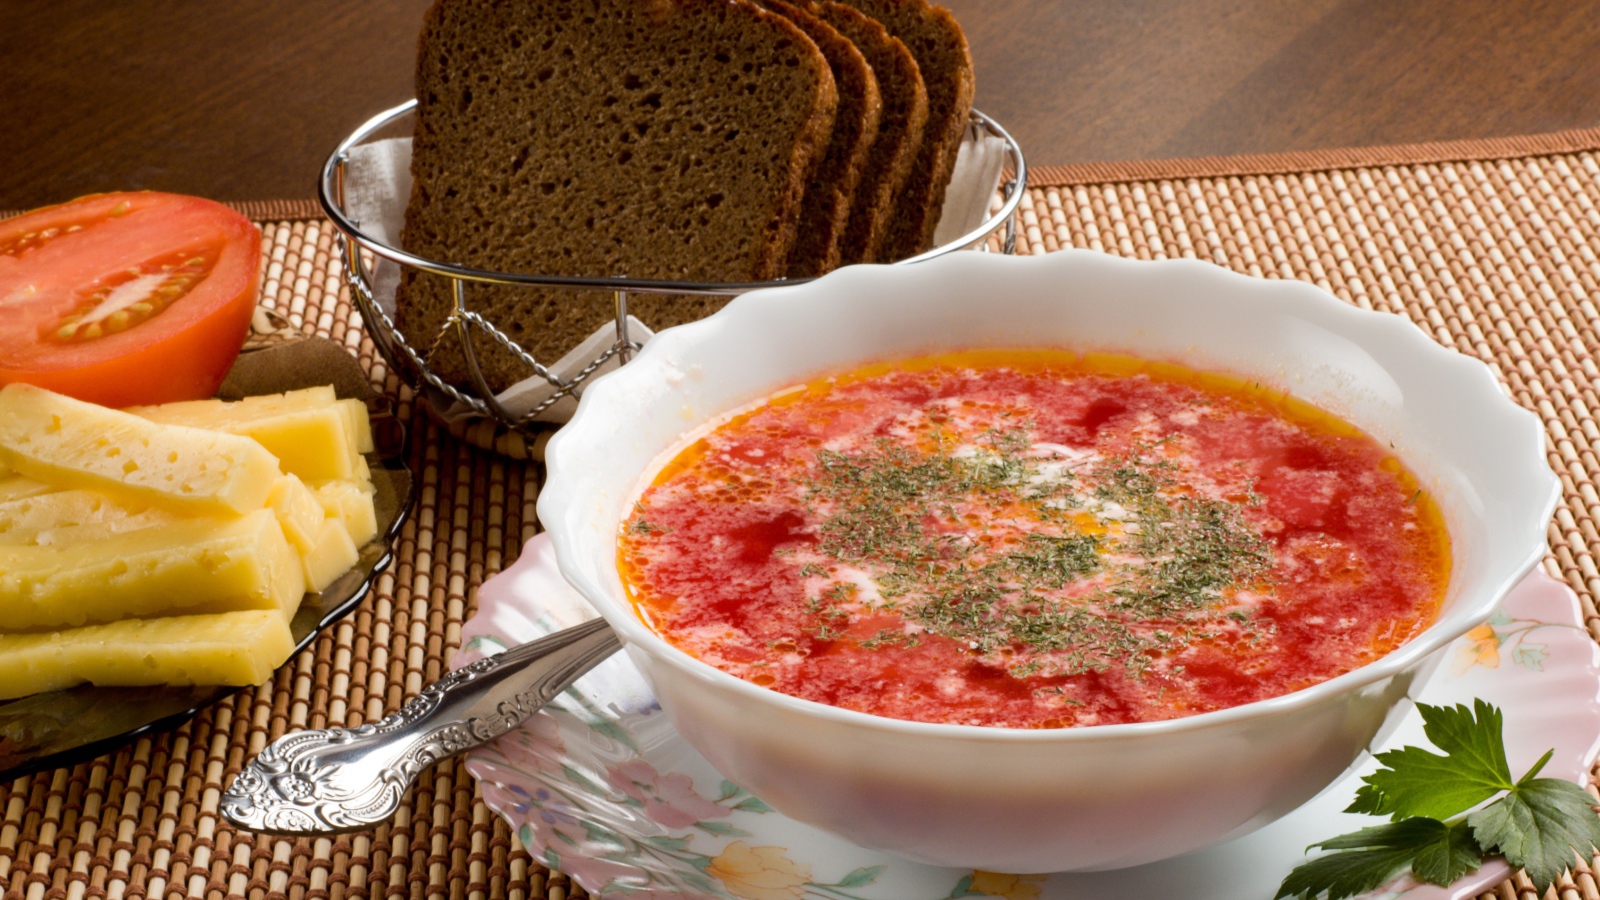 A plate of red borscht on the table with cheese and black bread